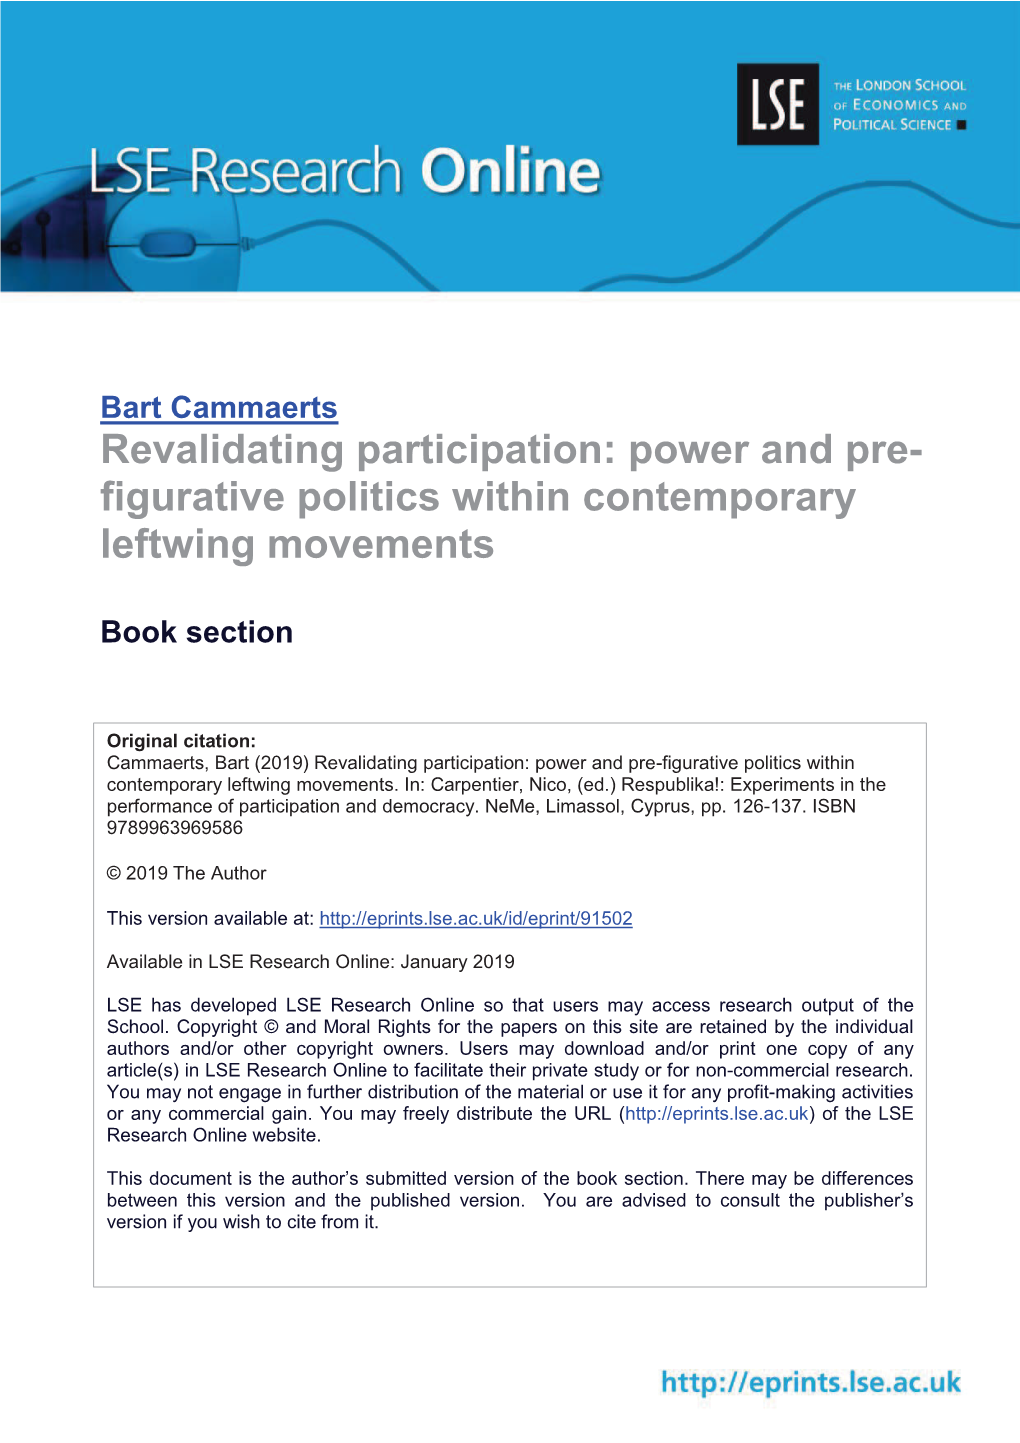 Revalidating Participation: Power and Pre - Figurative Politics Within Contemporary Leftwing Movements